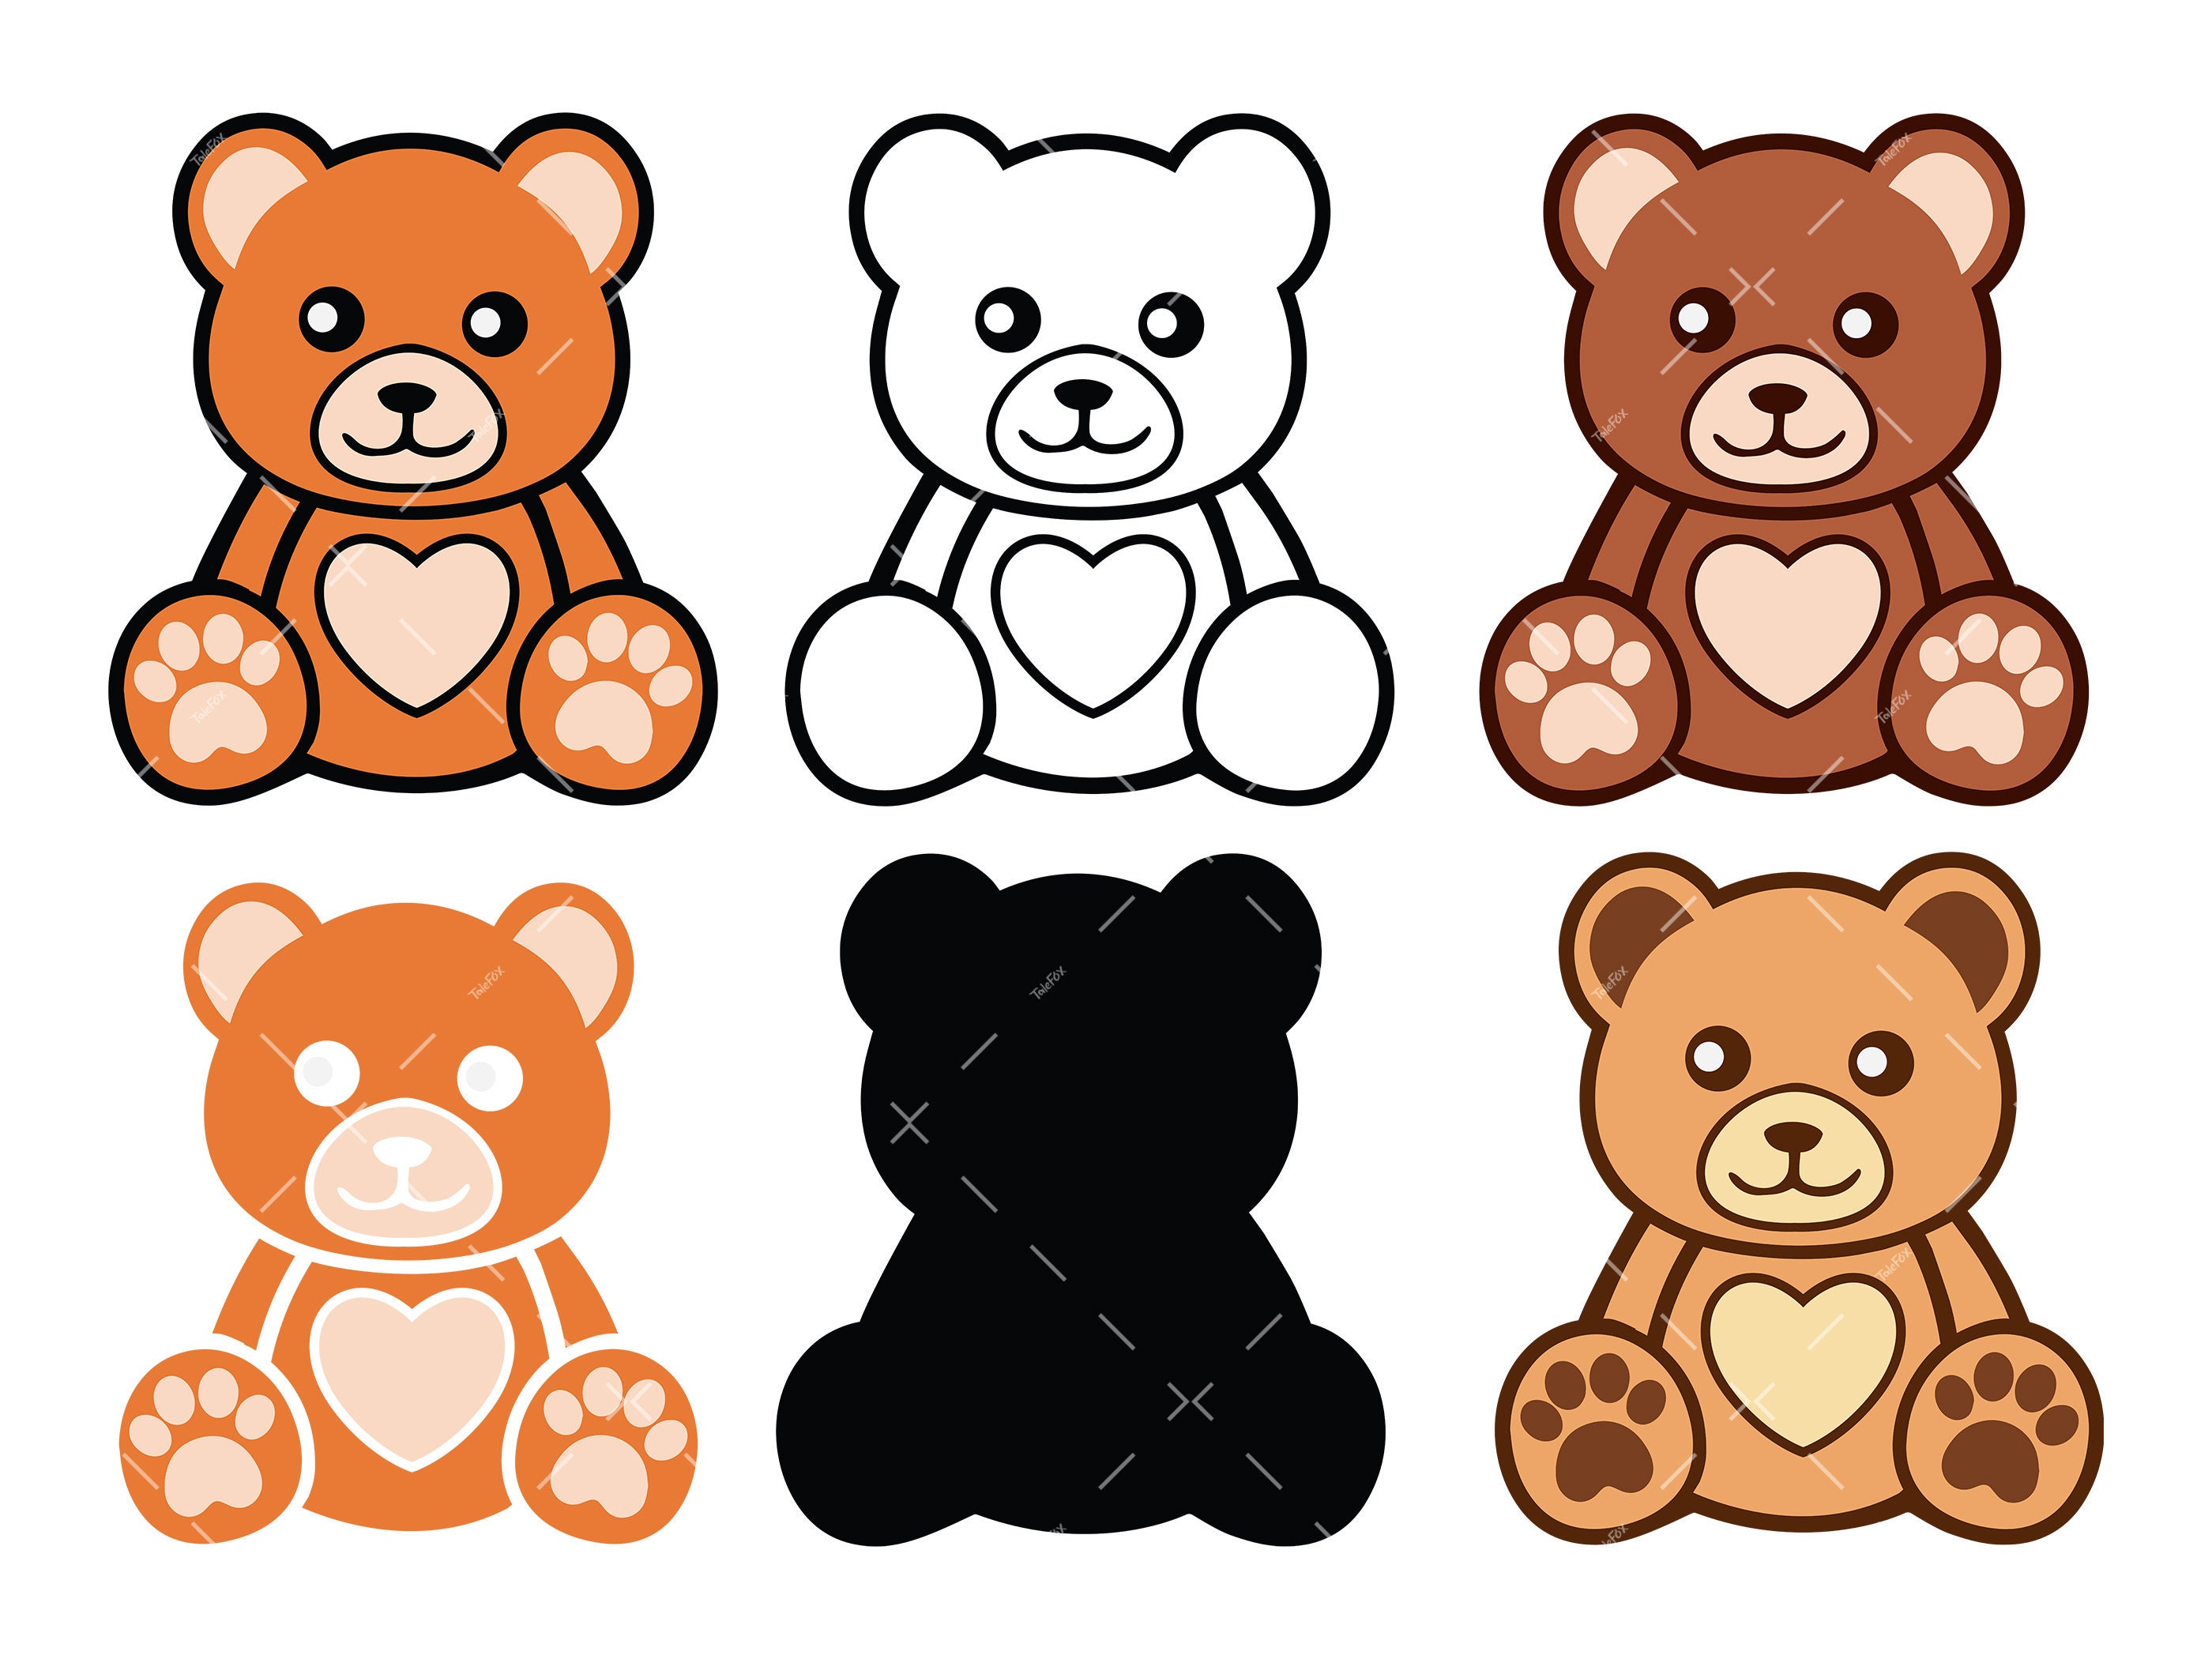 Teddy Bear  Silhouette Vector SVG EPS Graphic by Creative Oasis